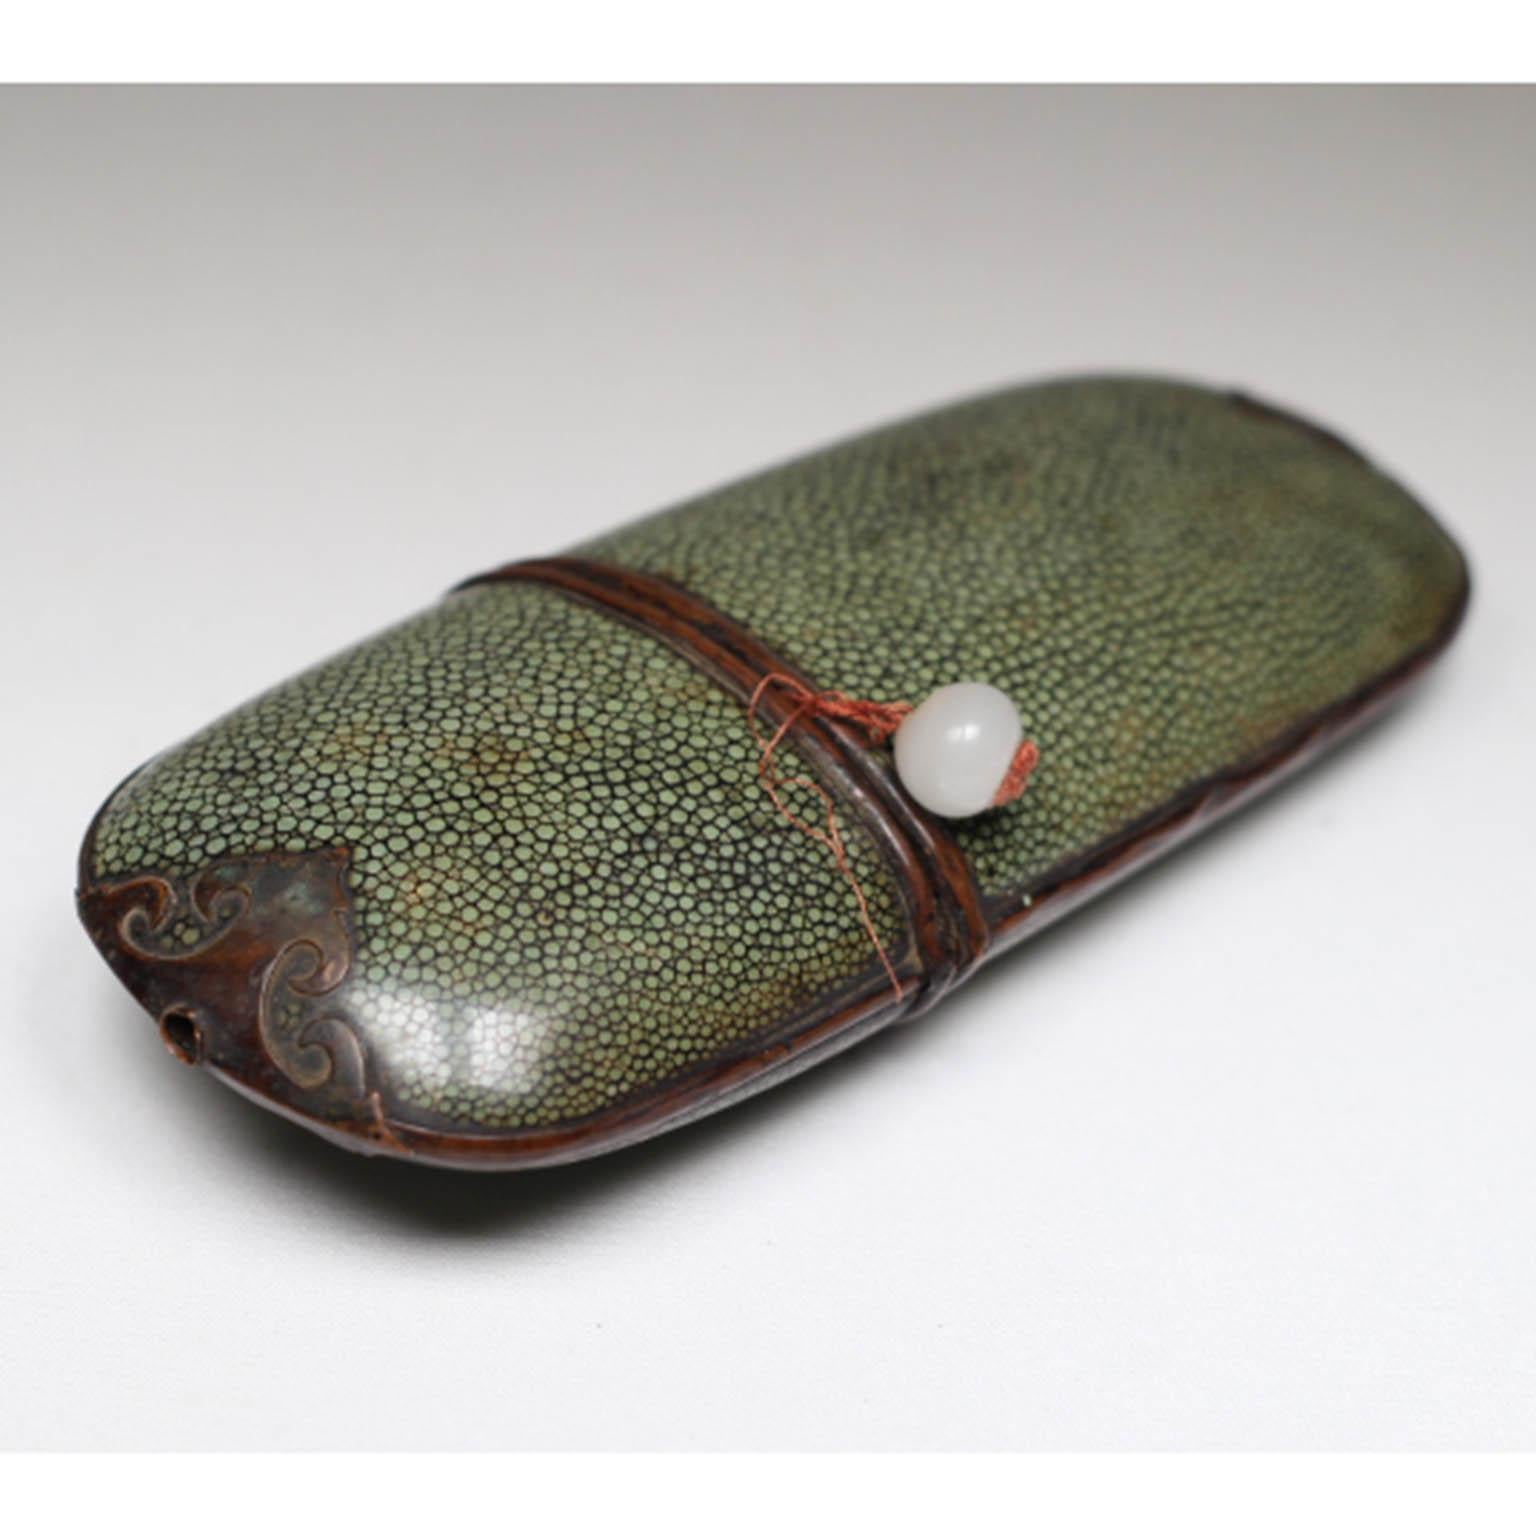 Antique Chinese Shagreen covered eyeglasses case with onyx. The case is fashioned from two pieces of wood which are covered in beautifully patterned shagreen (sharkskin) and copper accents.
The string has been broken and retied together.